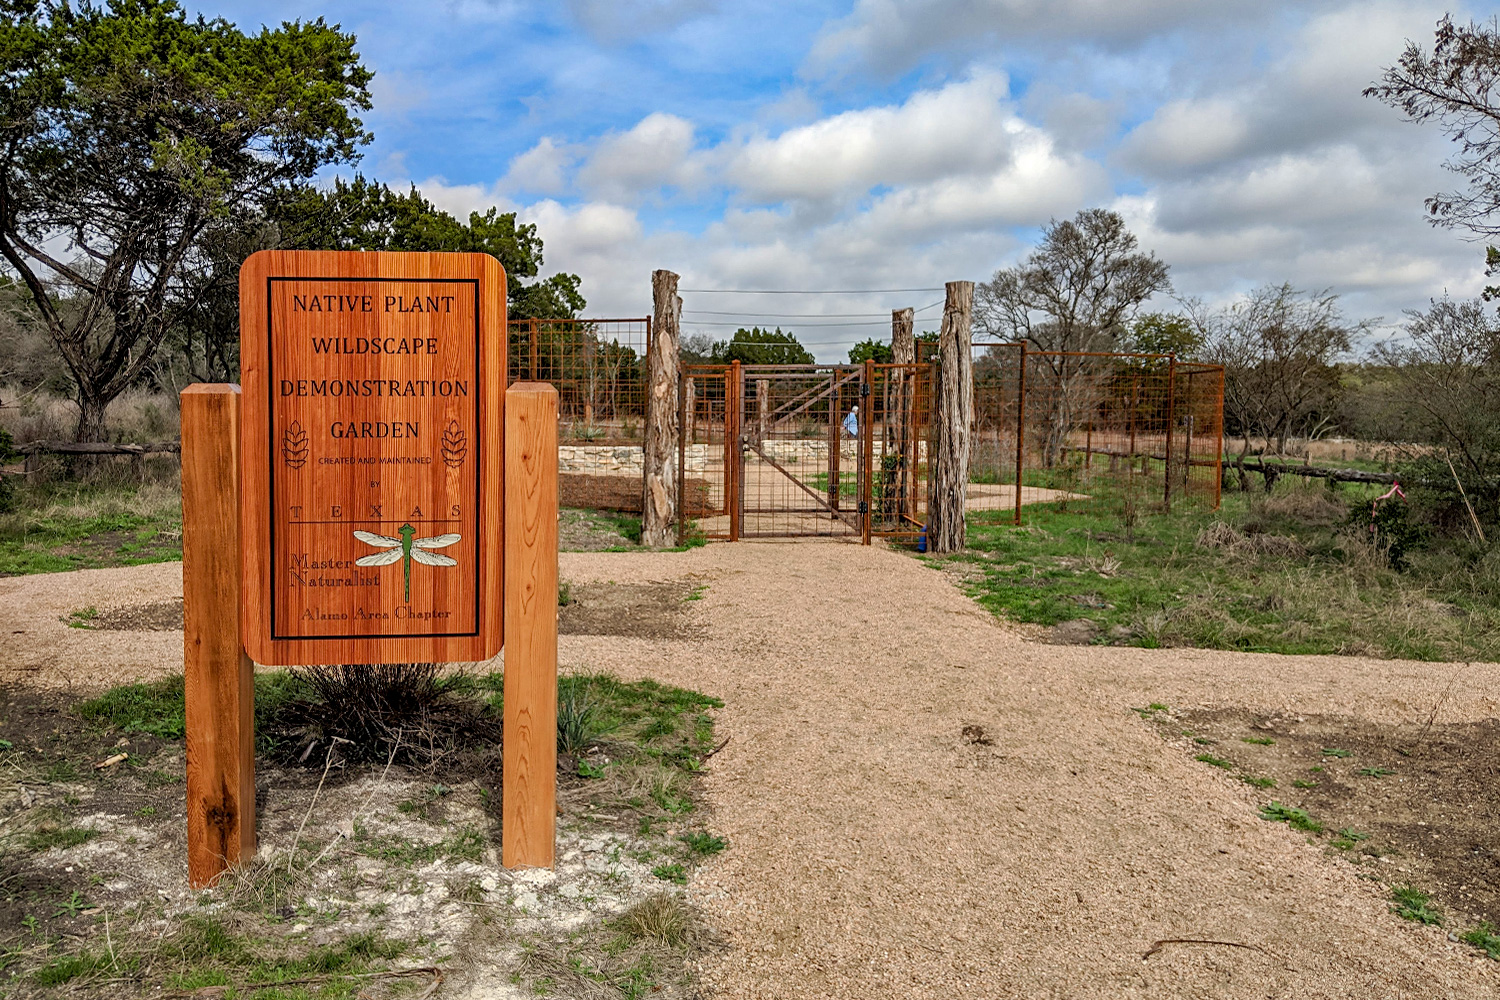  The Wildscape Demonstration Garden is located near the Urban Ecology Center and is open whenever the park is open (sunrise to sunset). 